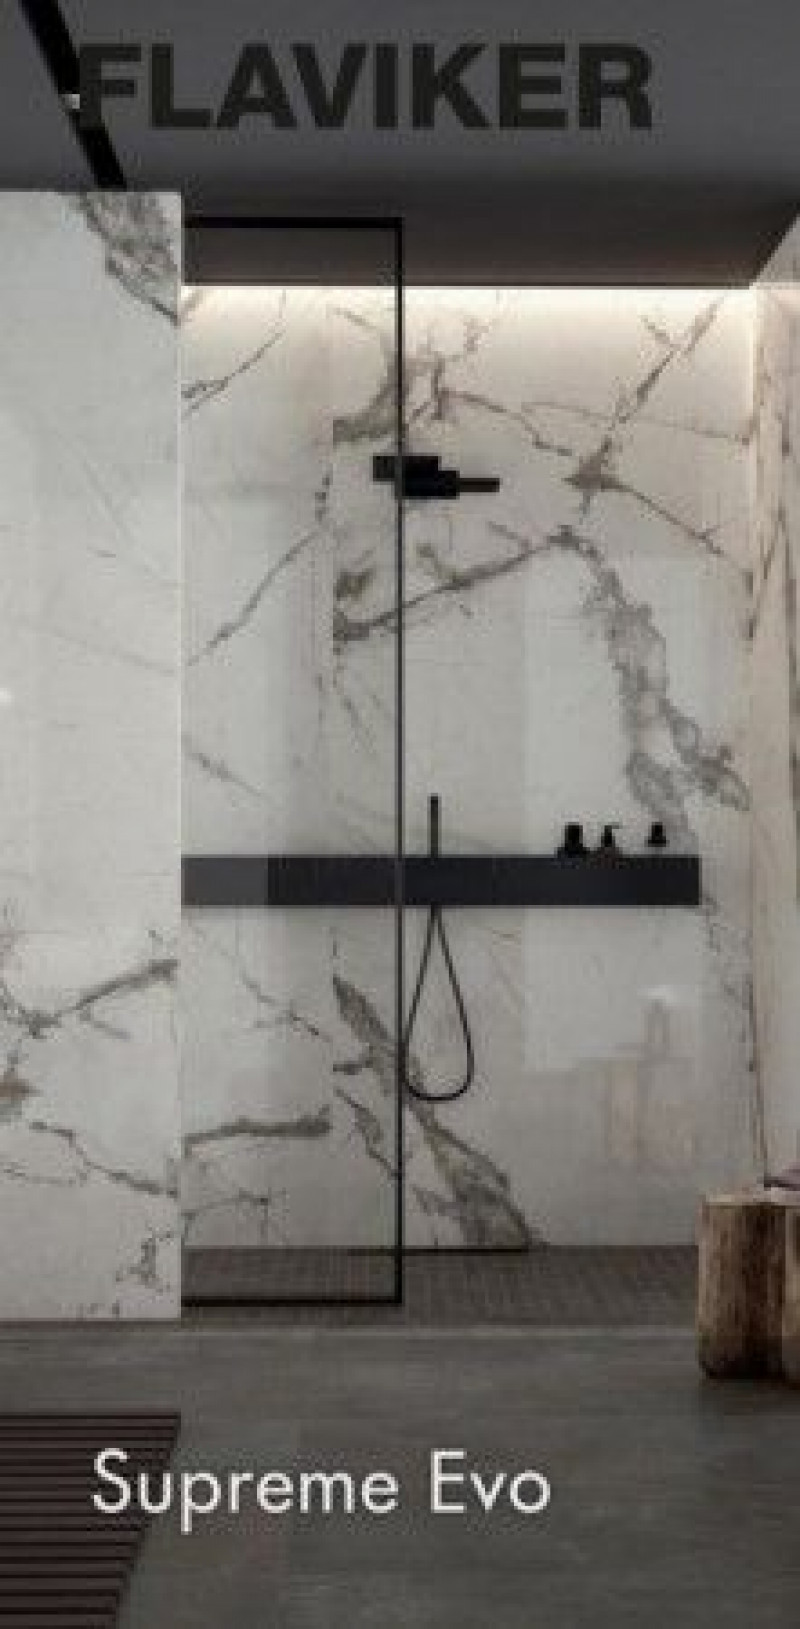 New Digital Design Ceramic Tile and Slab from Flaviker - Italy